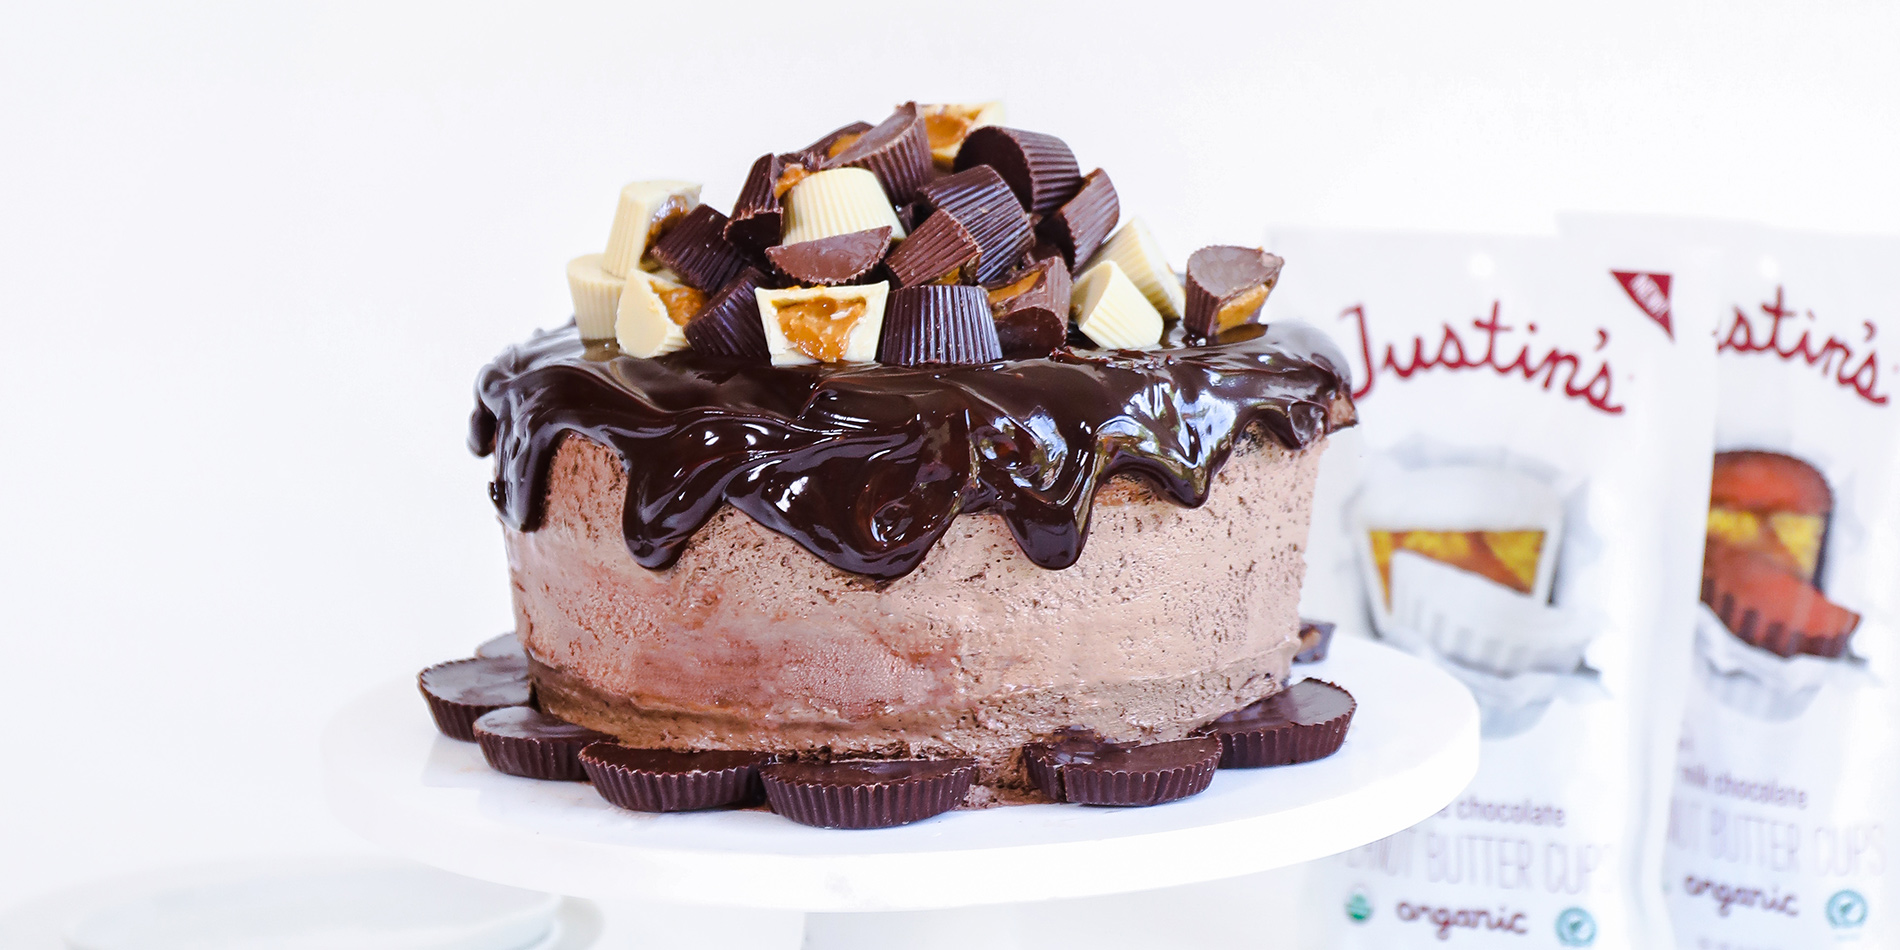 Peanut Butter Cup Ice Cream Cake on a white cake tray with a slice on a white plate with Justin's products in background